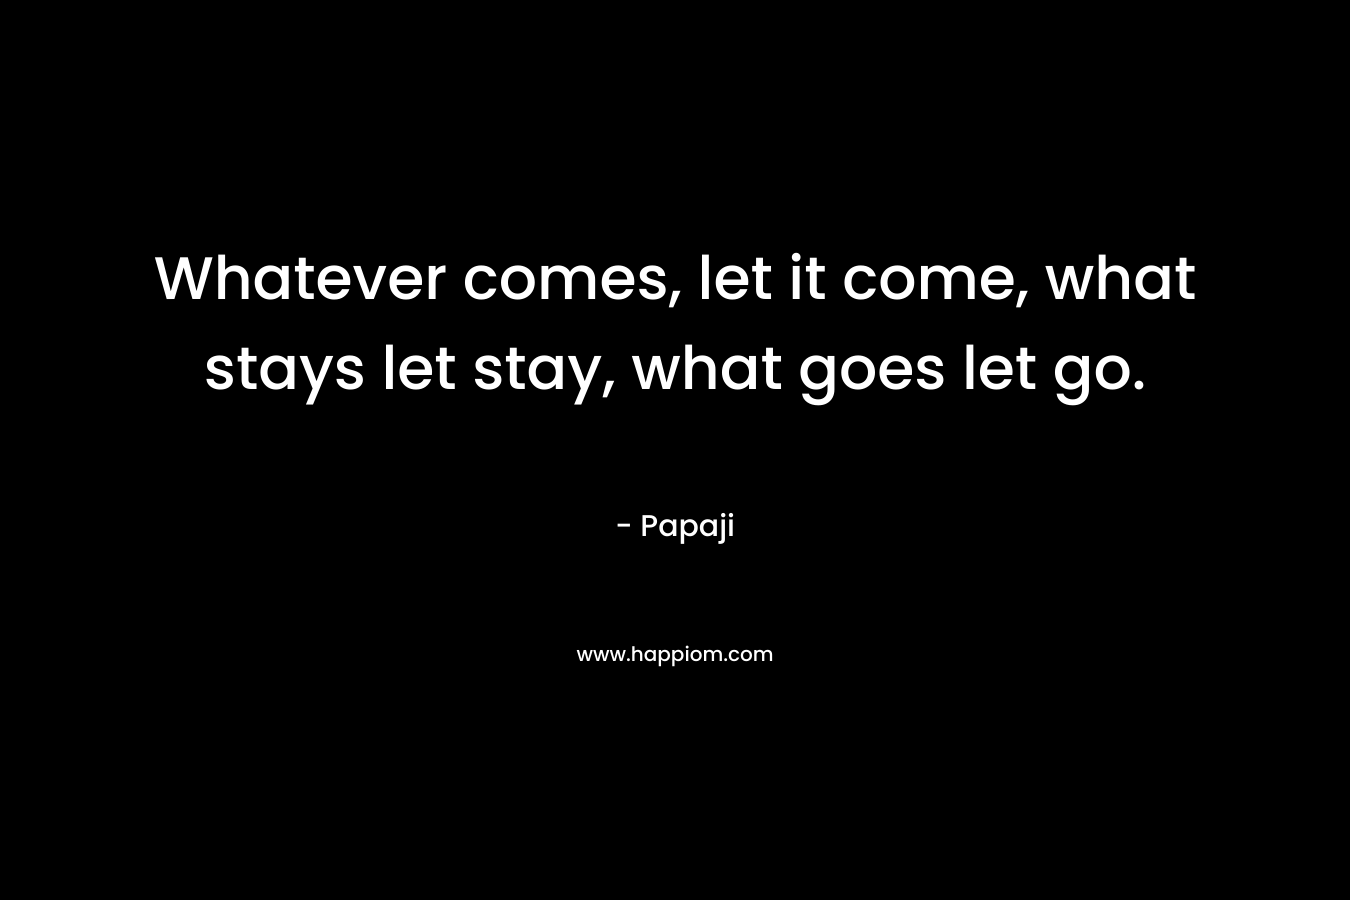 Whatever comes, let it come, what stays let stay, what goes let go. – Papaji